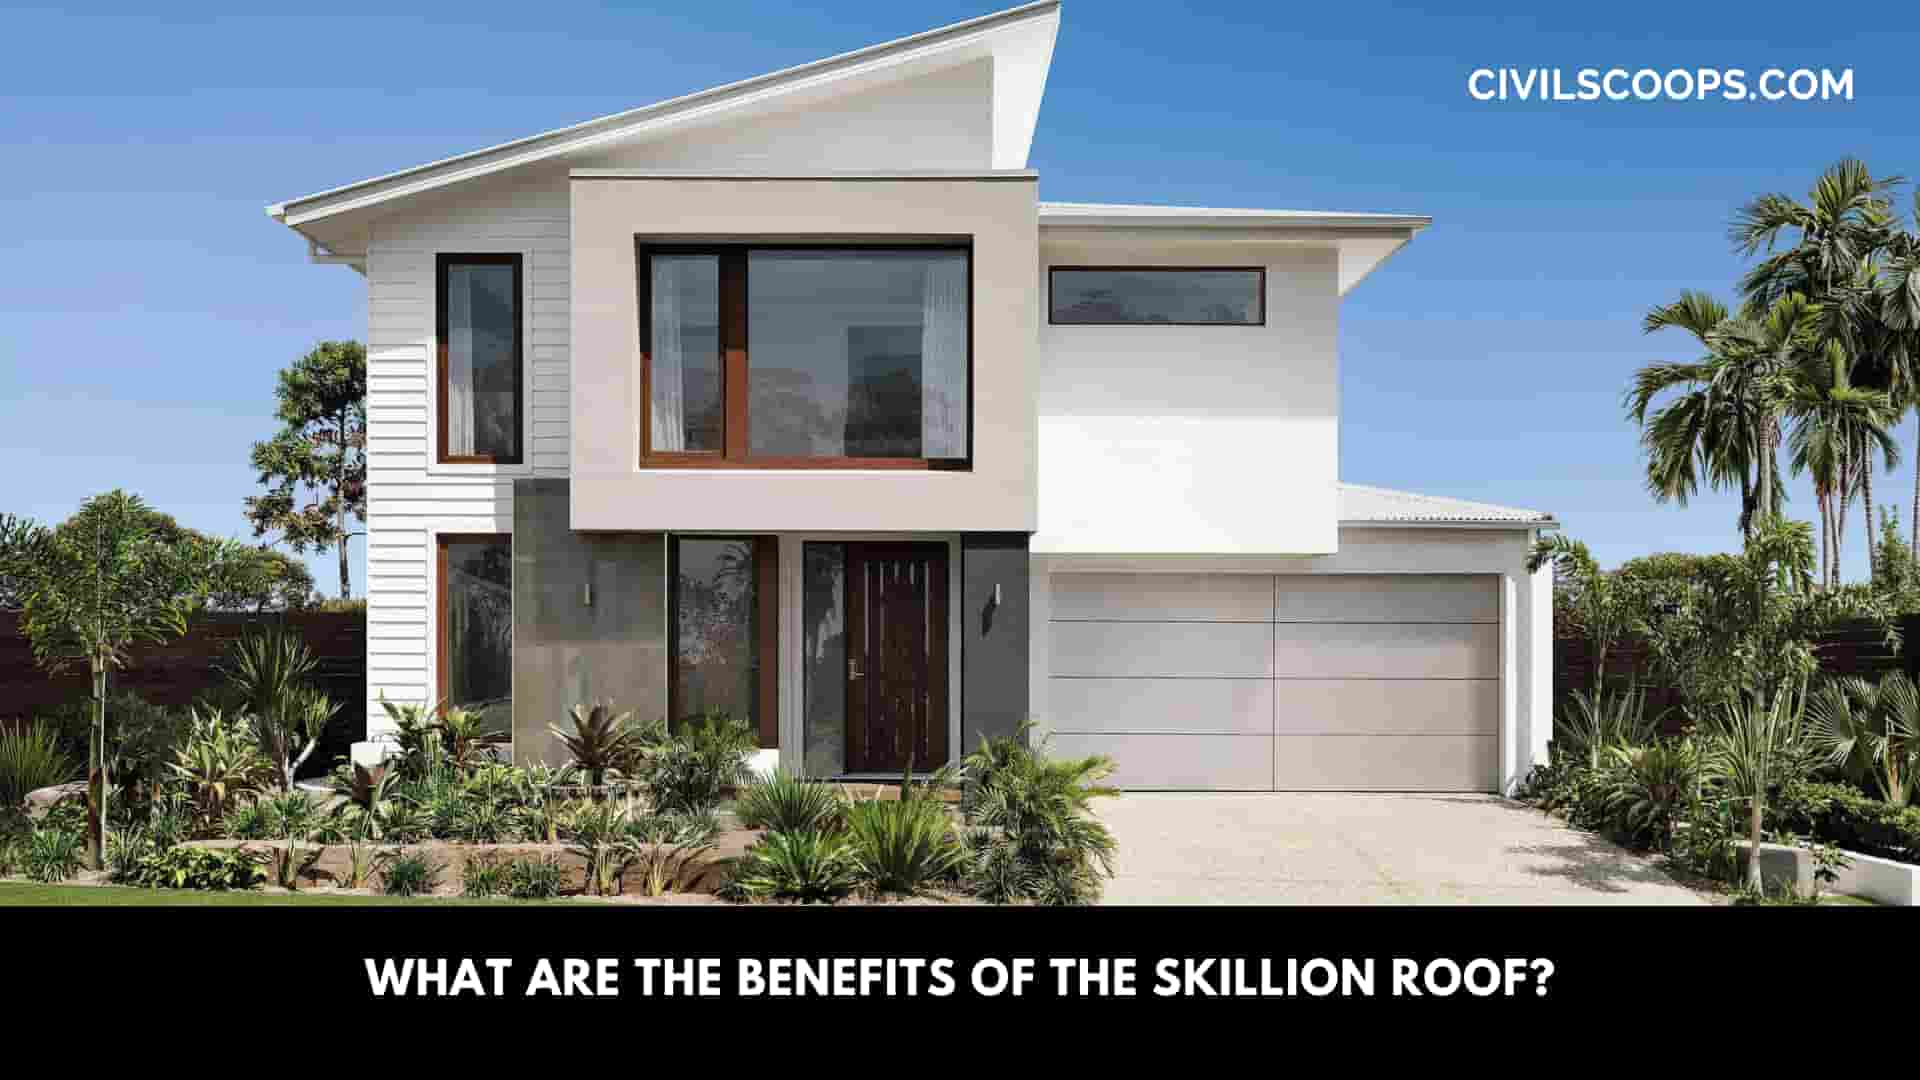 What Are the Benefits of the Skillion Roof?